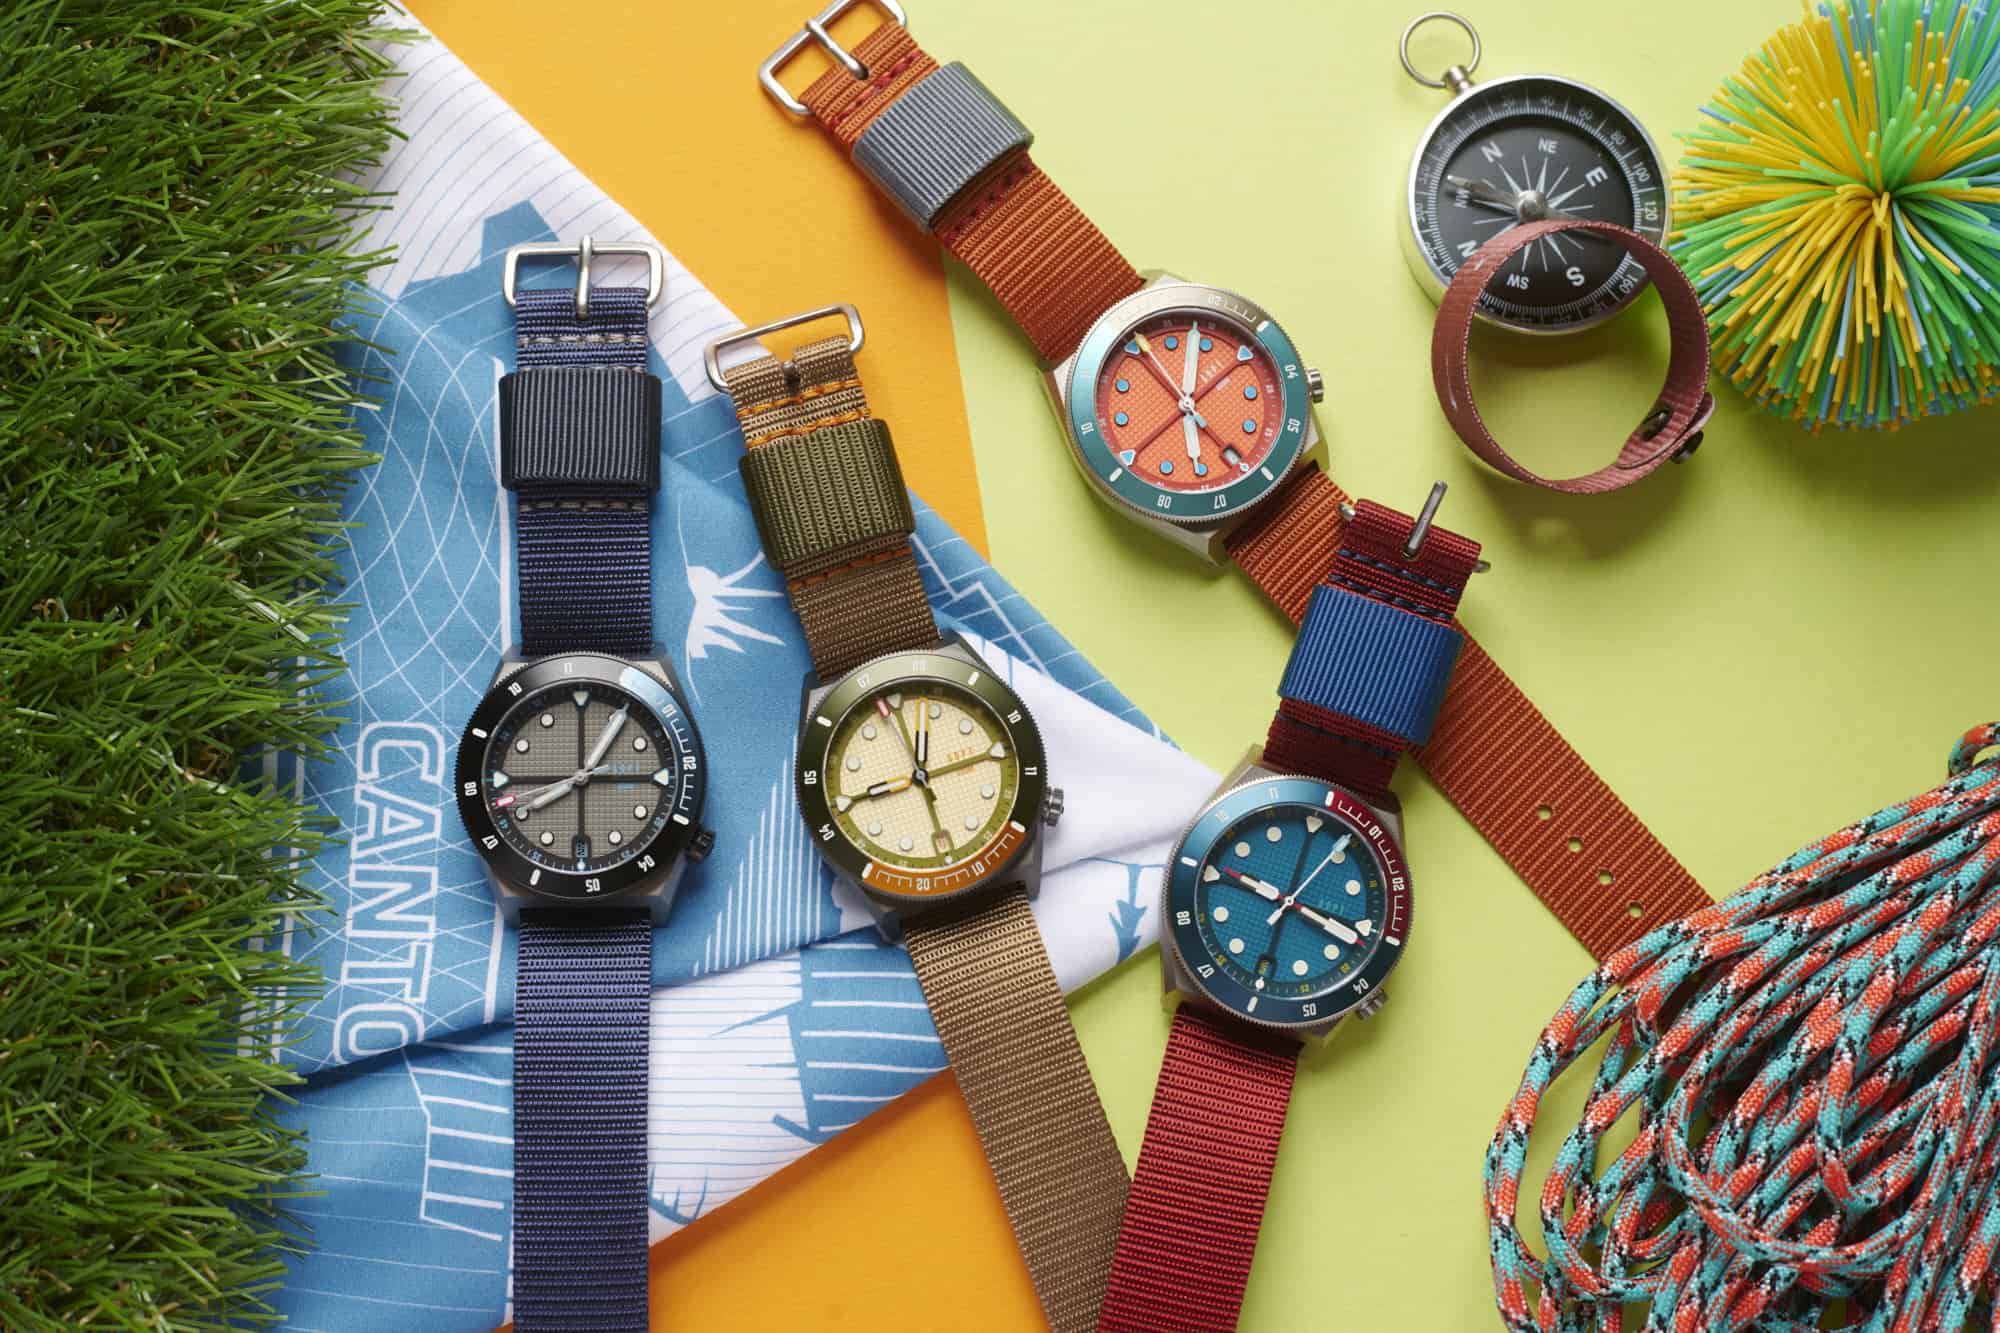 Kick Off The Summer With These Amazing Sales In The Windup Watch Shop!